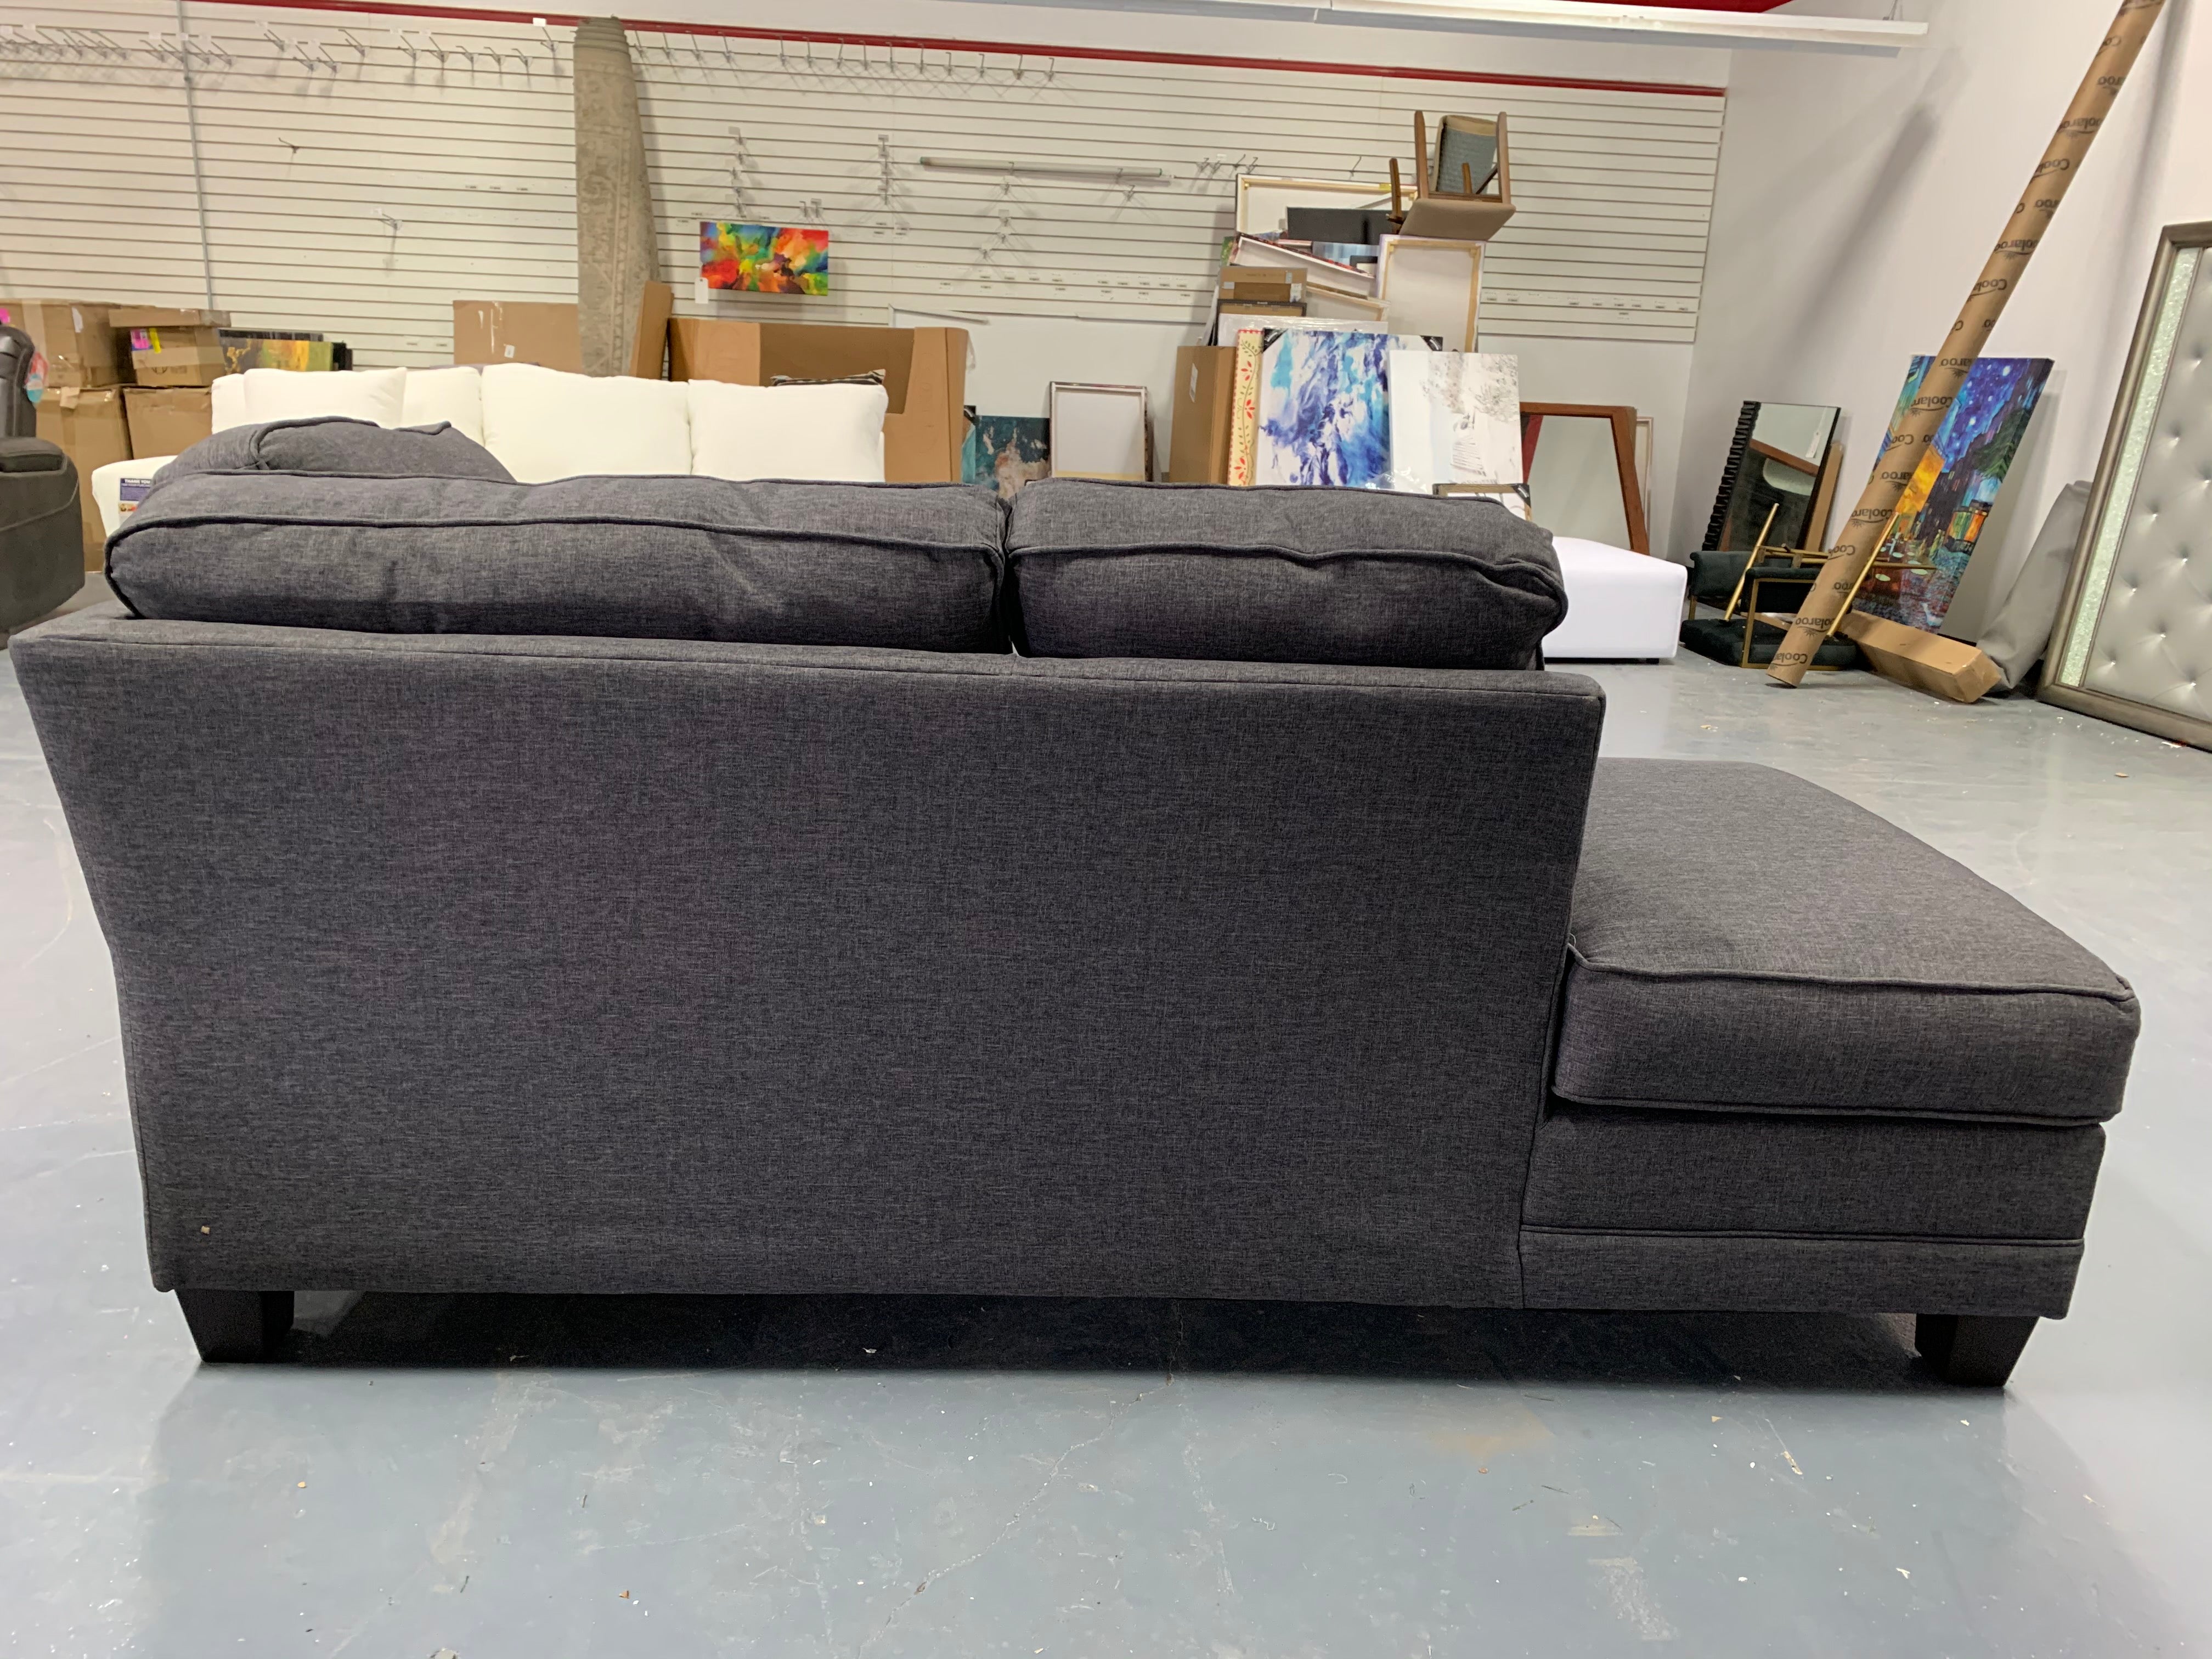 Charcoal Gray Chaise Lounge Piece *As Is*